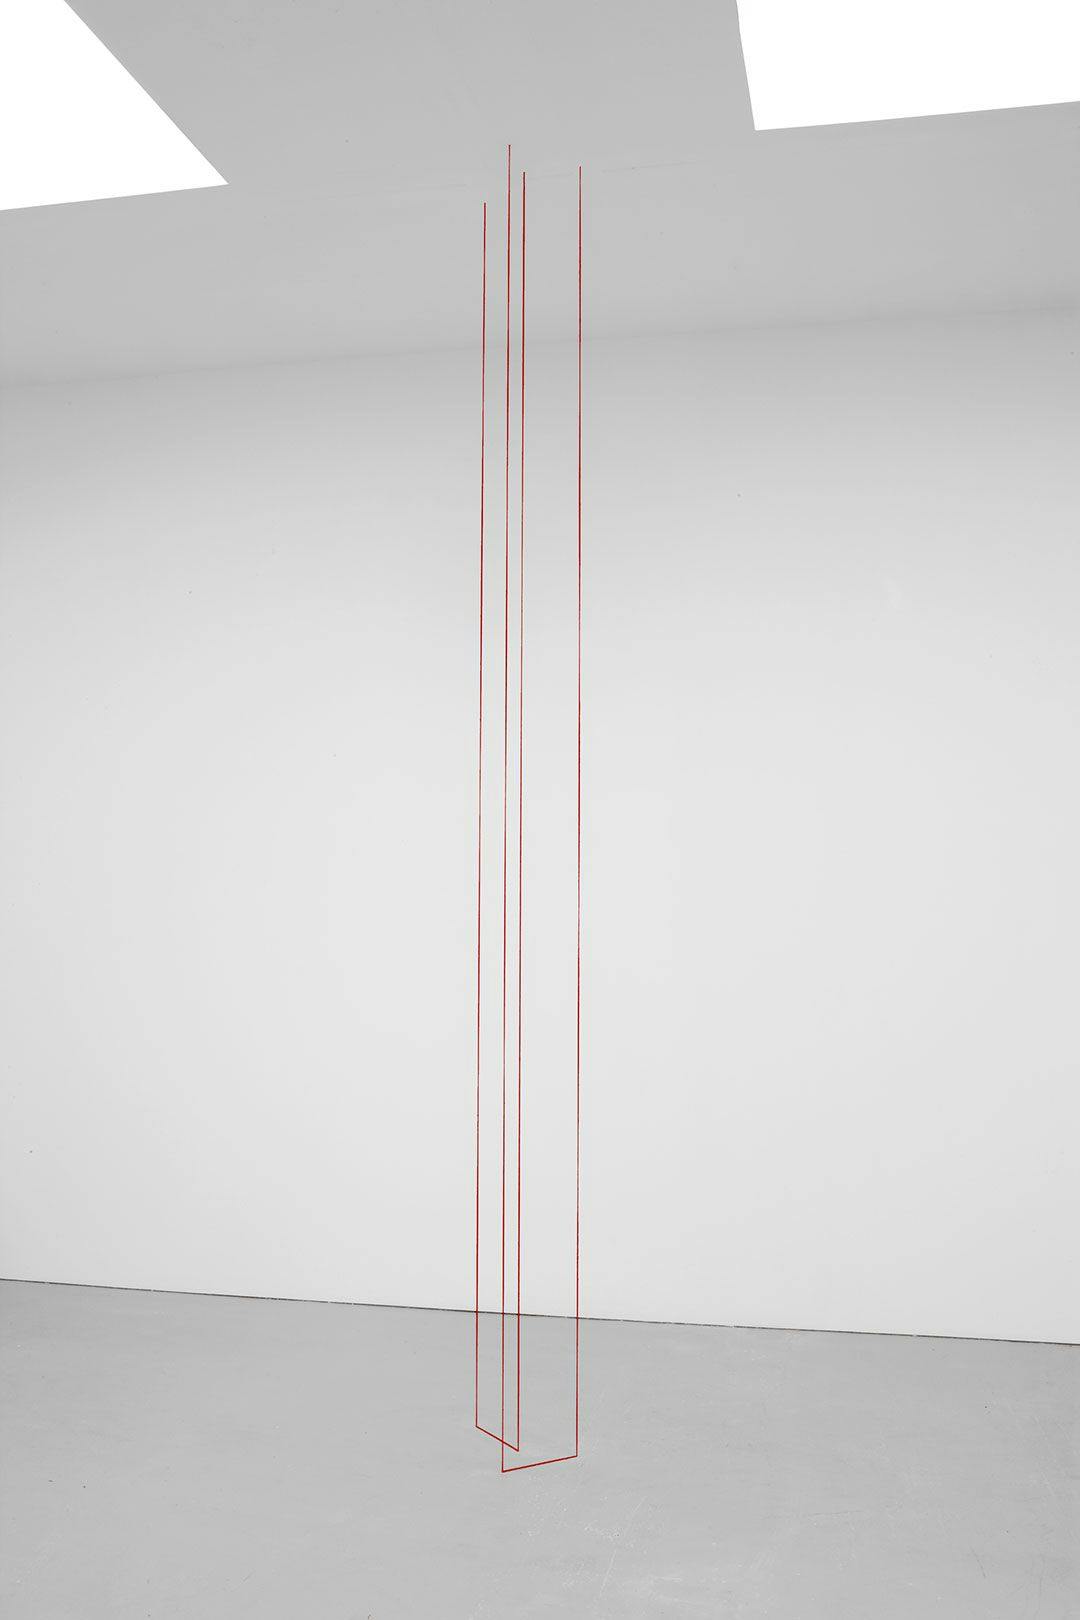 A red acrylic yarn sculpture by Fred Sandback, titled Untitled (Two-part Vertical Construction), dated 1976.